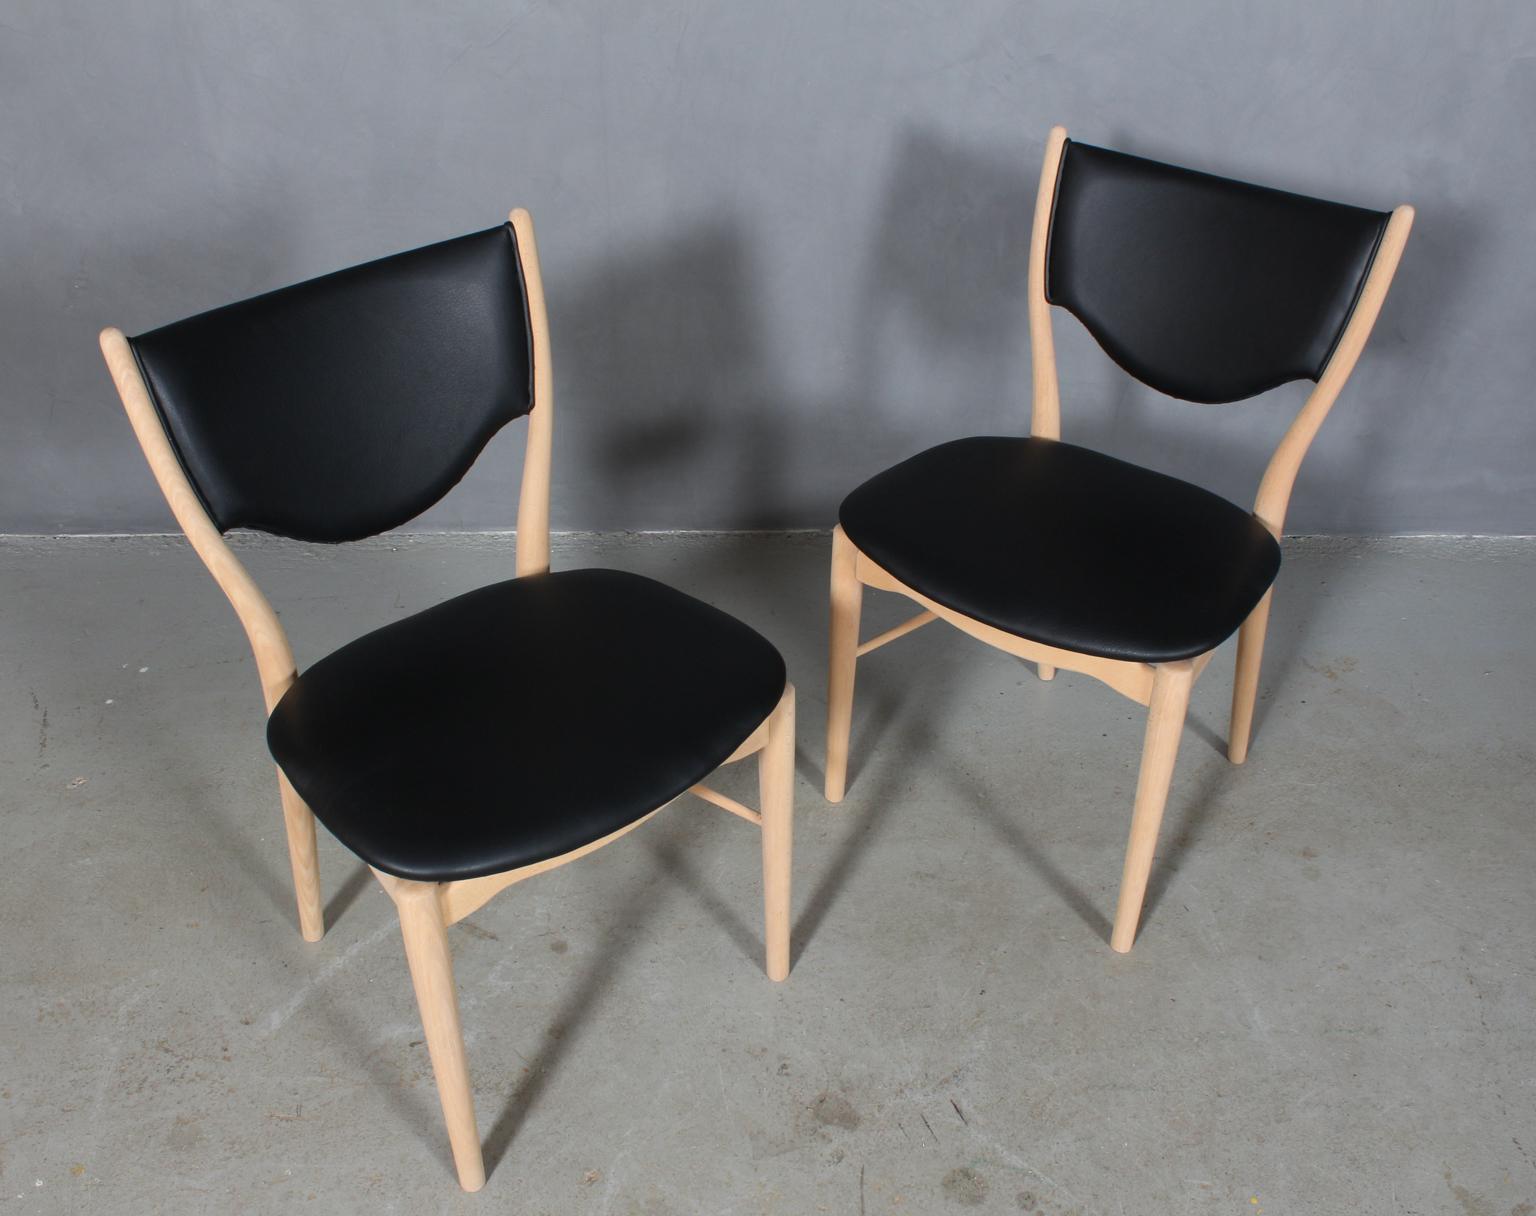 Finn Juhl BO 63 chair, designed in 1949 and manufactured by Bovirke, Denmark. Beech wood with seat and back new upholstered in black aniline leather. This model was also manufactured by Niels Vodder at a later date and was called the NV 64.